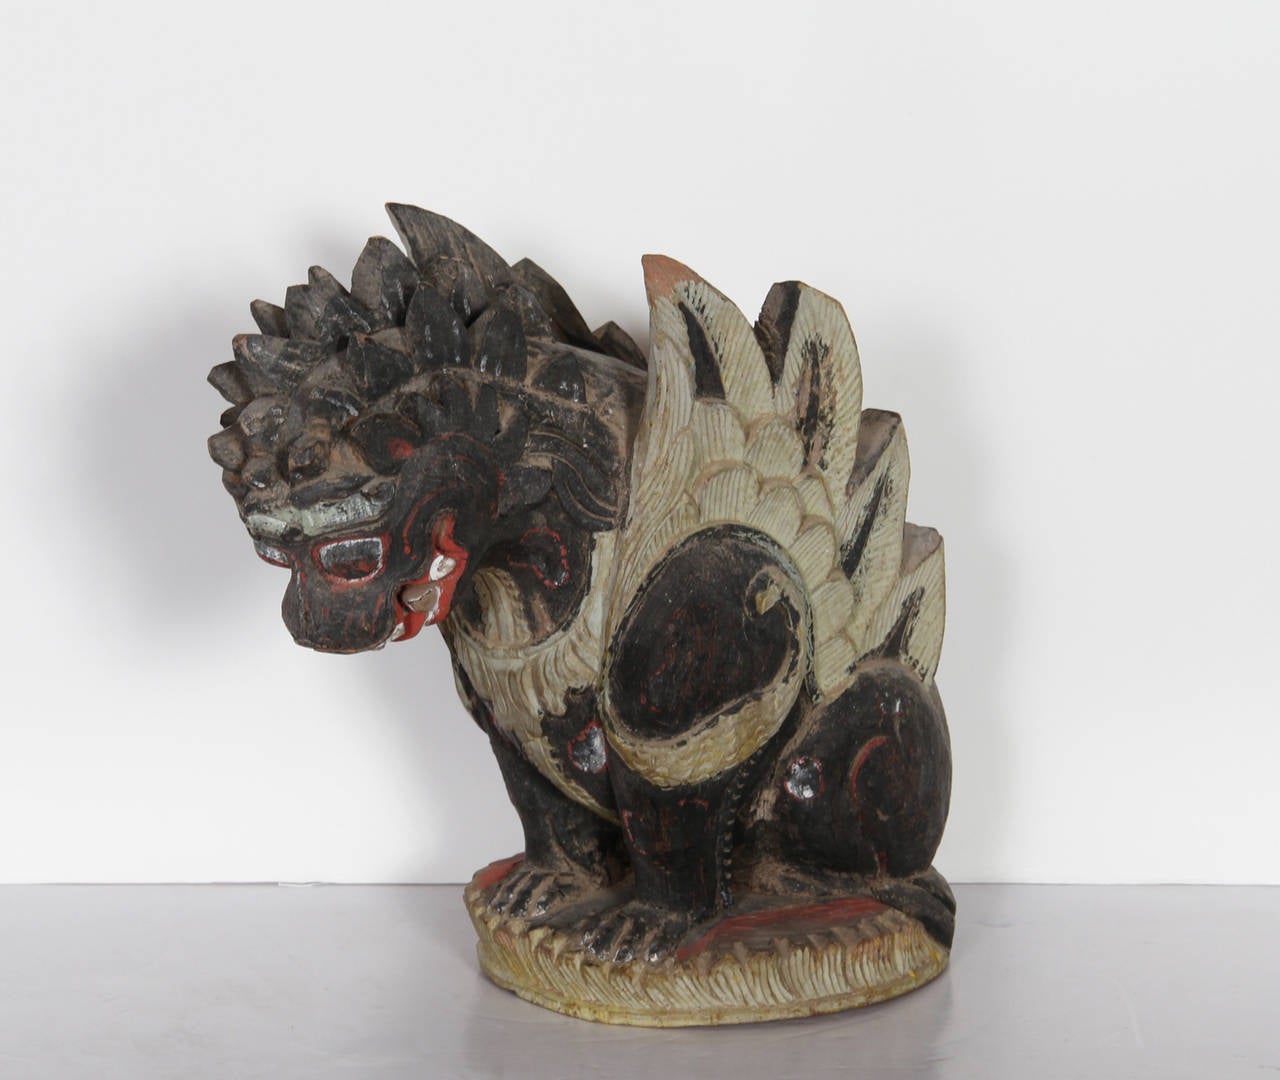 Unknown Figurative Sculpture - Dragon, Sculpture Chinese Early 20th Century